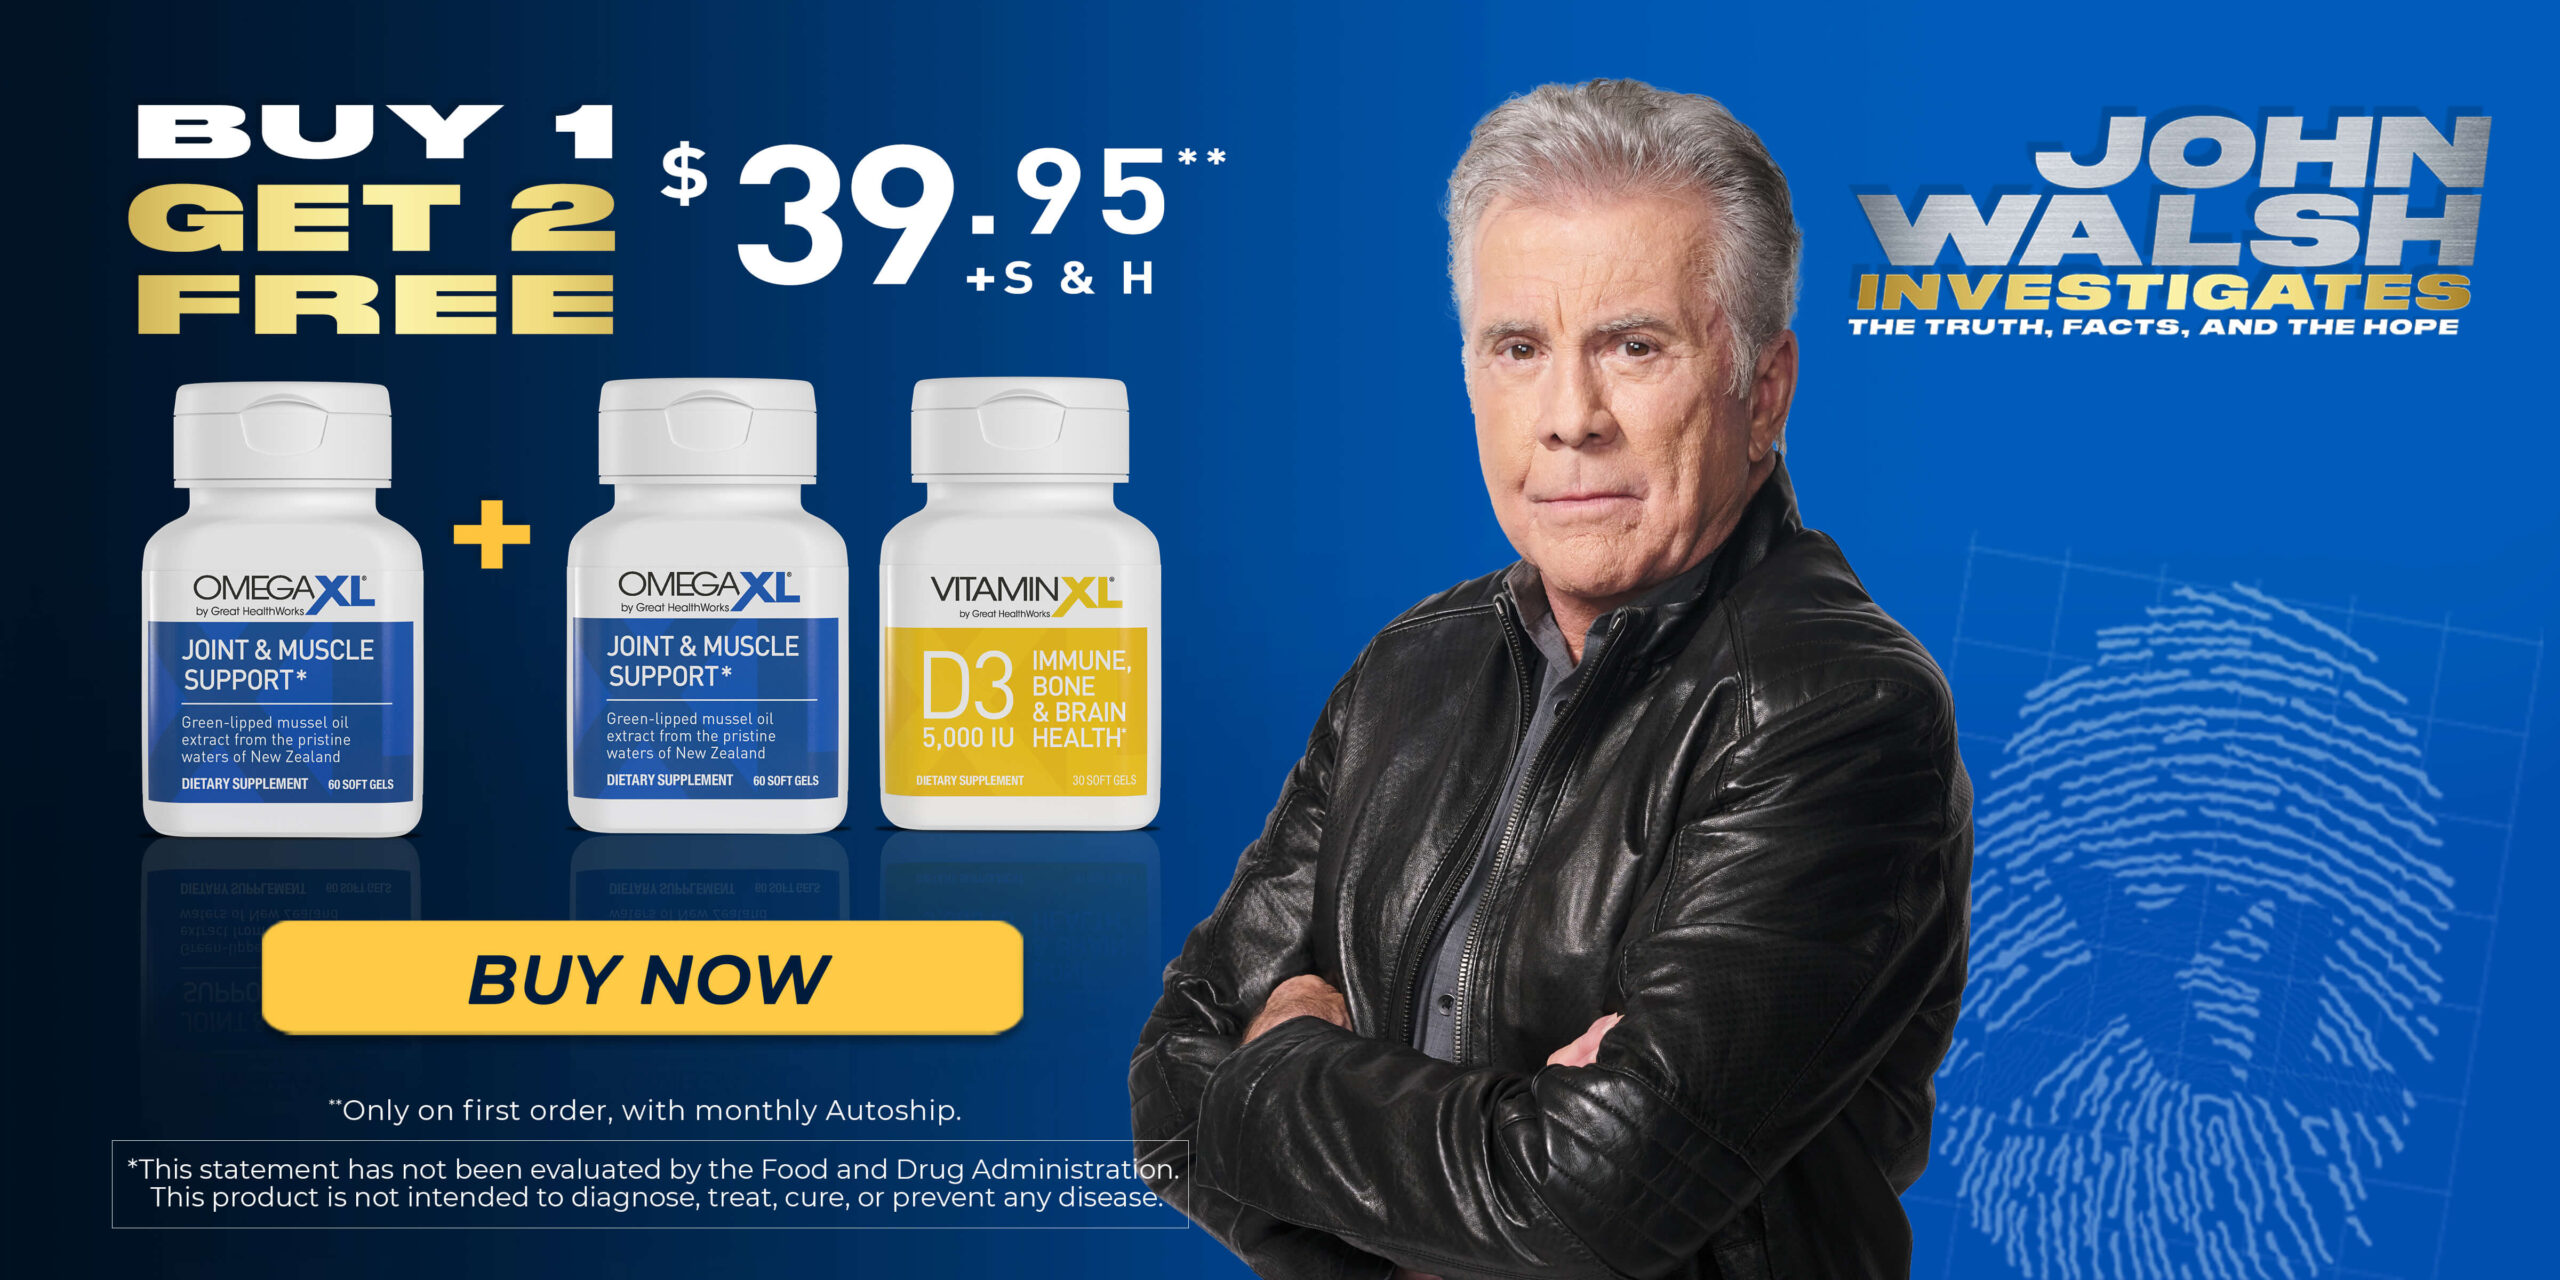 Buy One Get Two Free OmegaXL and VitaminXL $39.95 Bundle